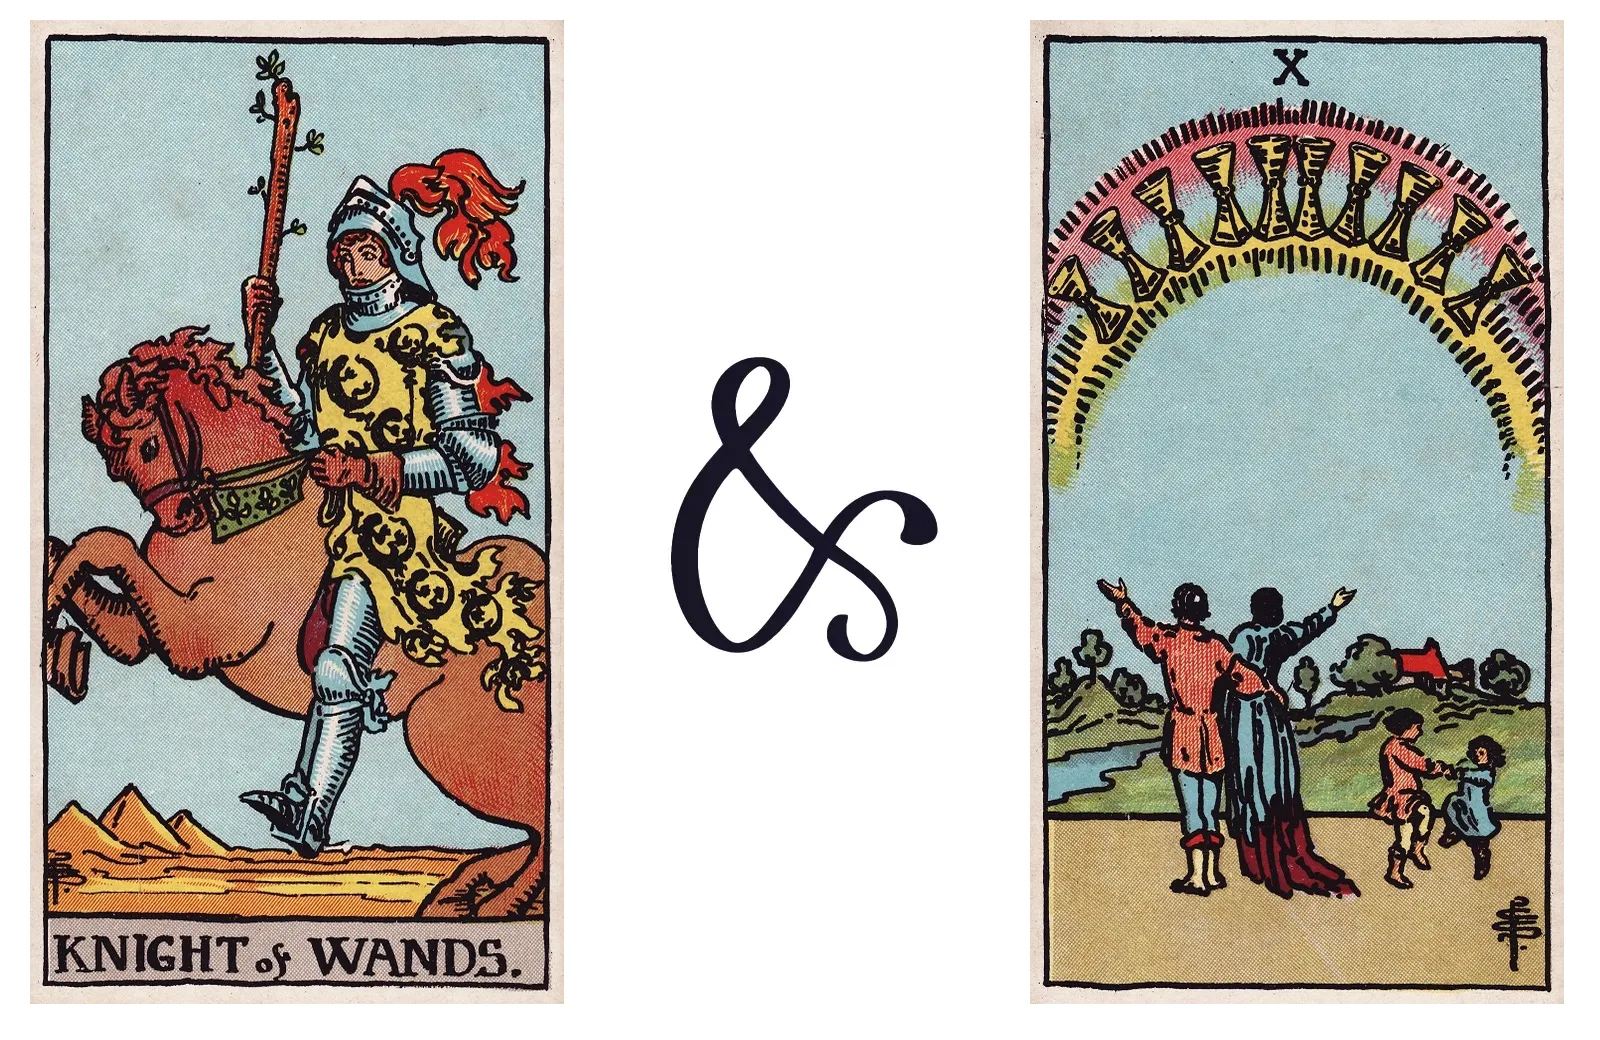 Knight of Wands and Ten of Cups